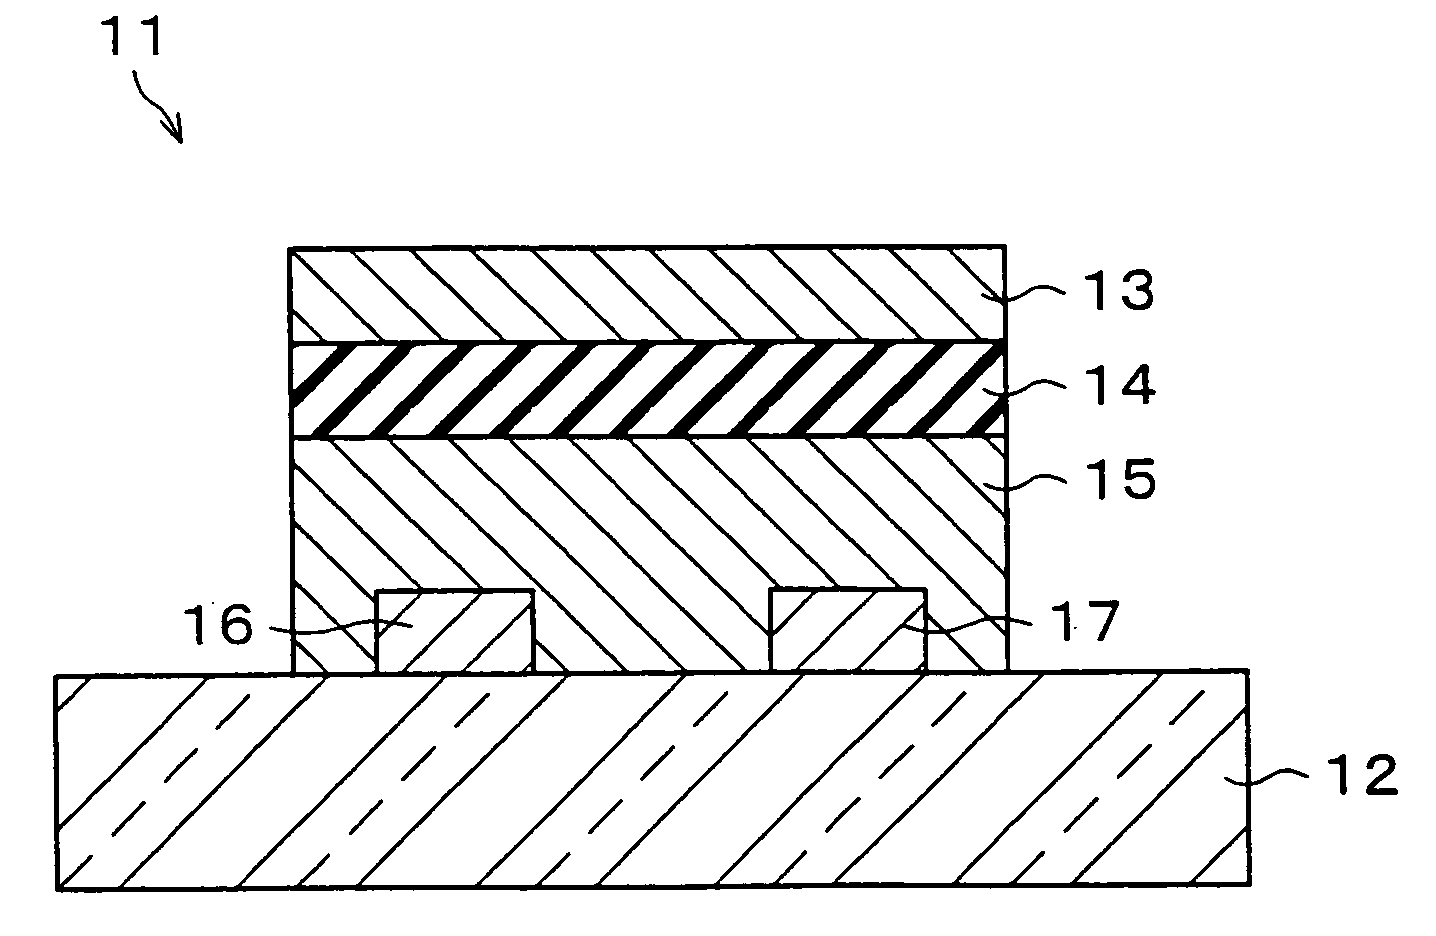 Semiconductor device and display comprising same